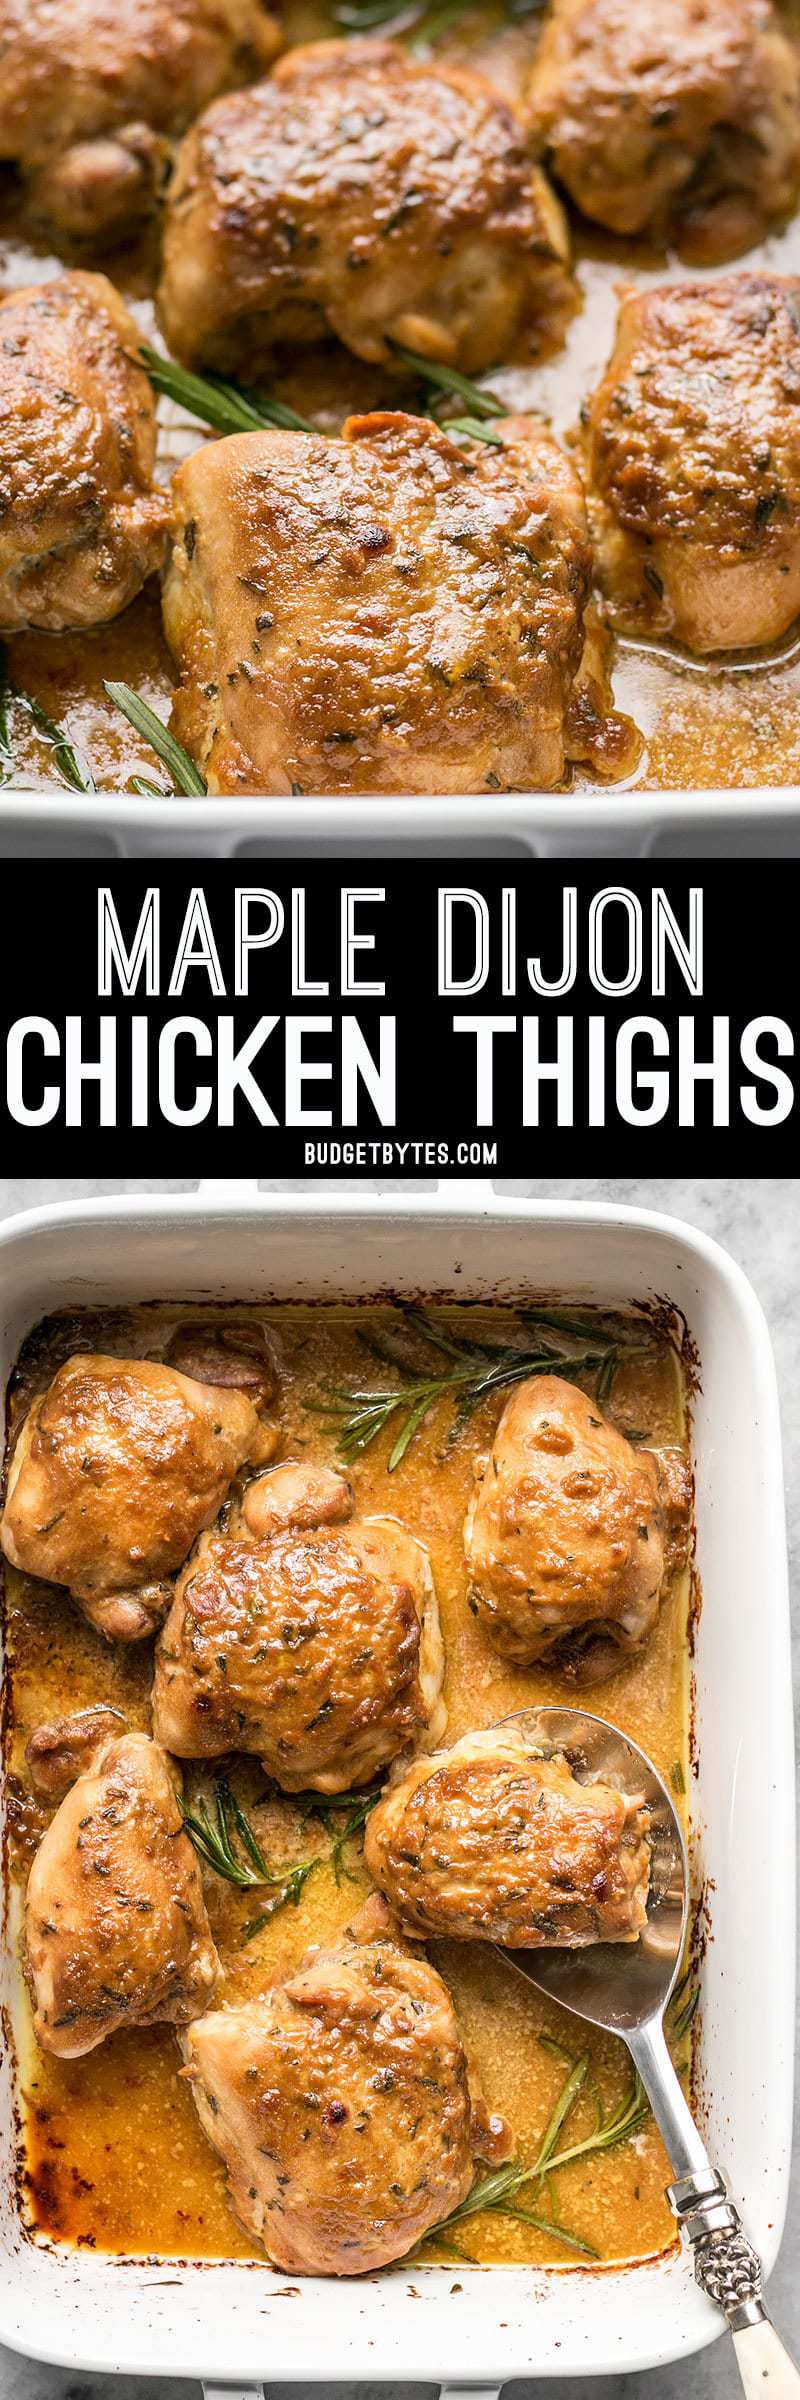 Collage of images for maple dijon chicken thighs with title text in the center.